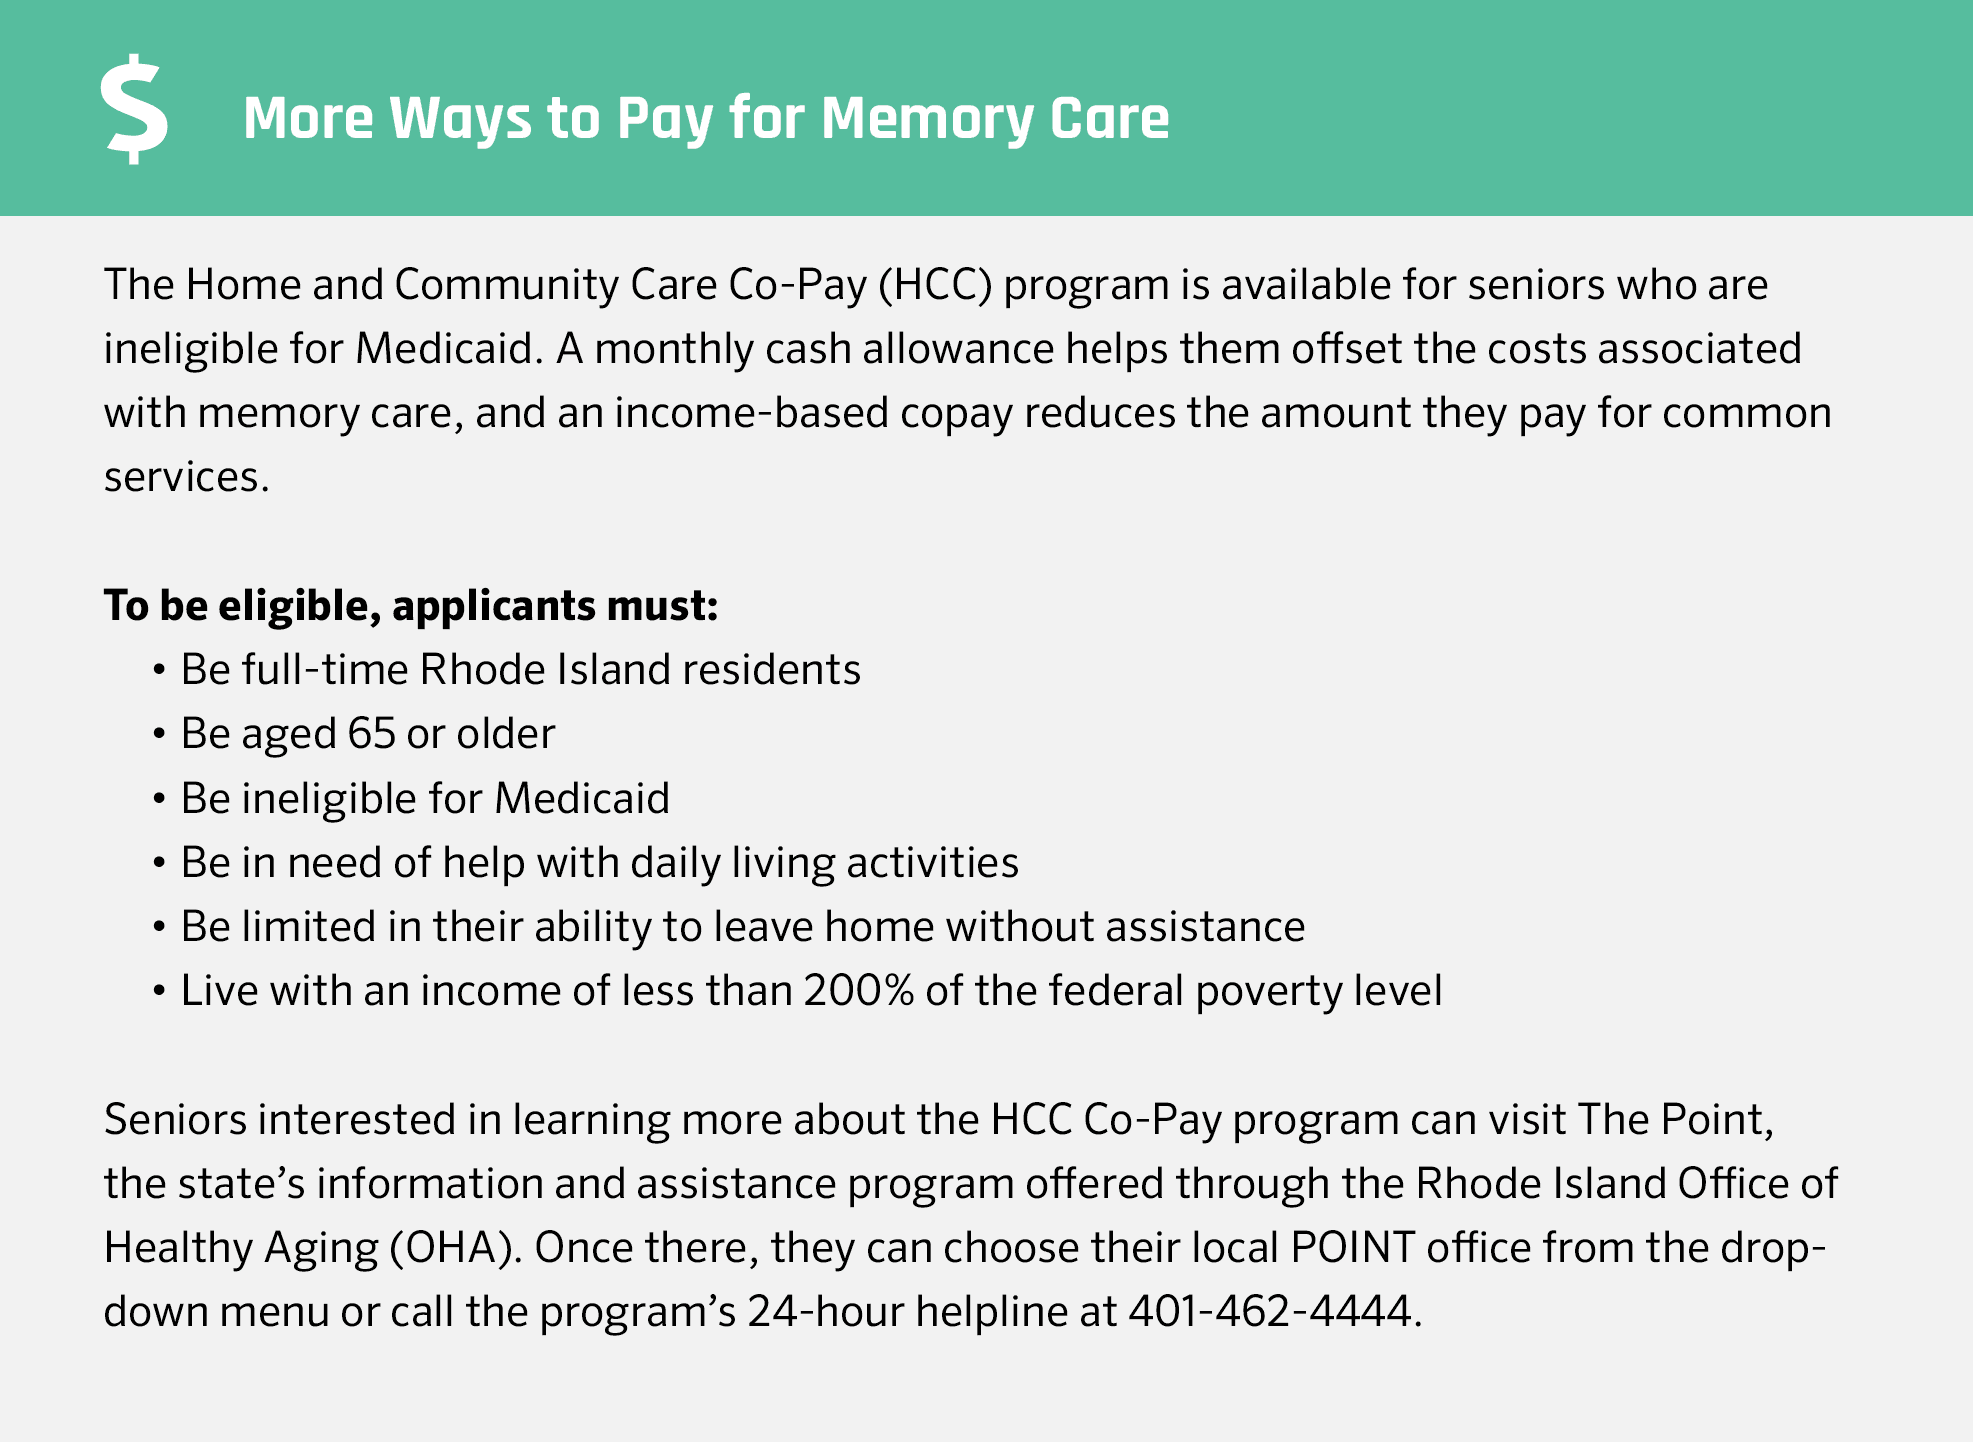 More ways to pay for memory care in Rhode Island